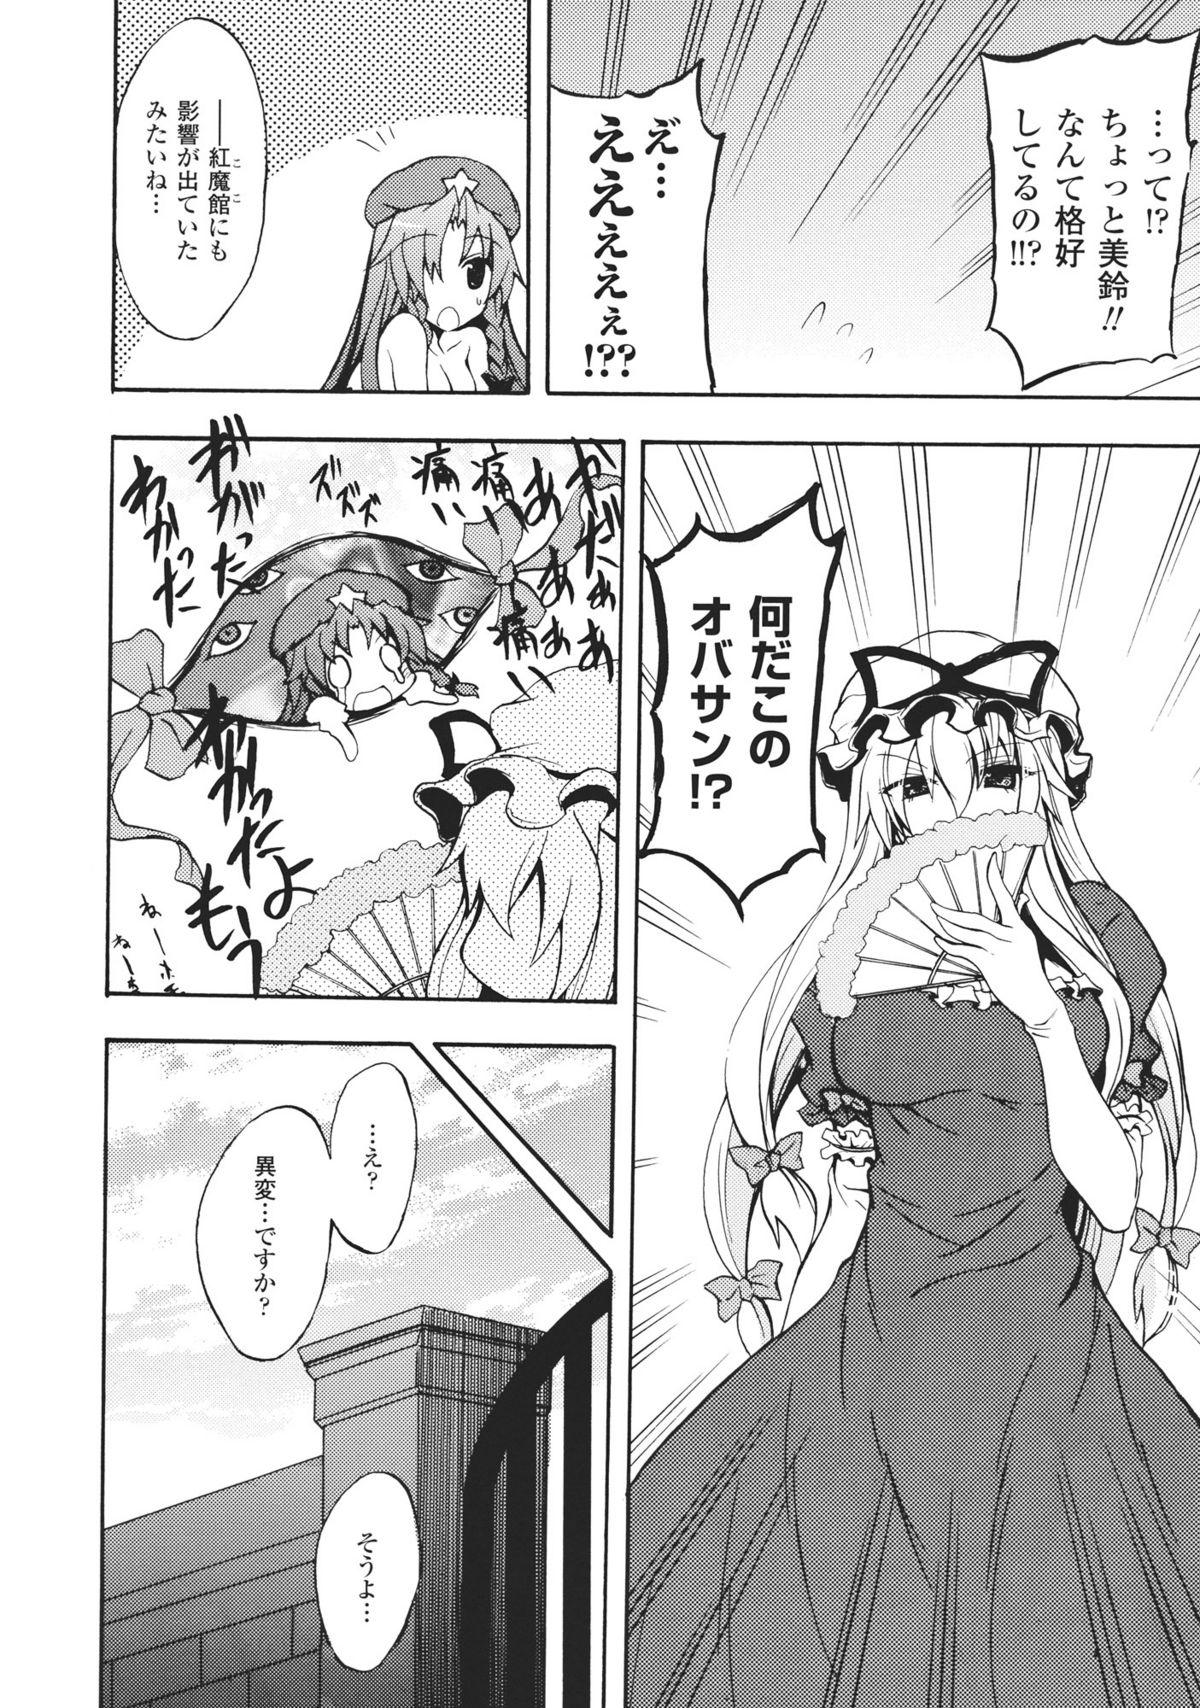 Bathroom Hong Meirin Vol.2 - Touhou project Amazing - Page 12